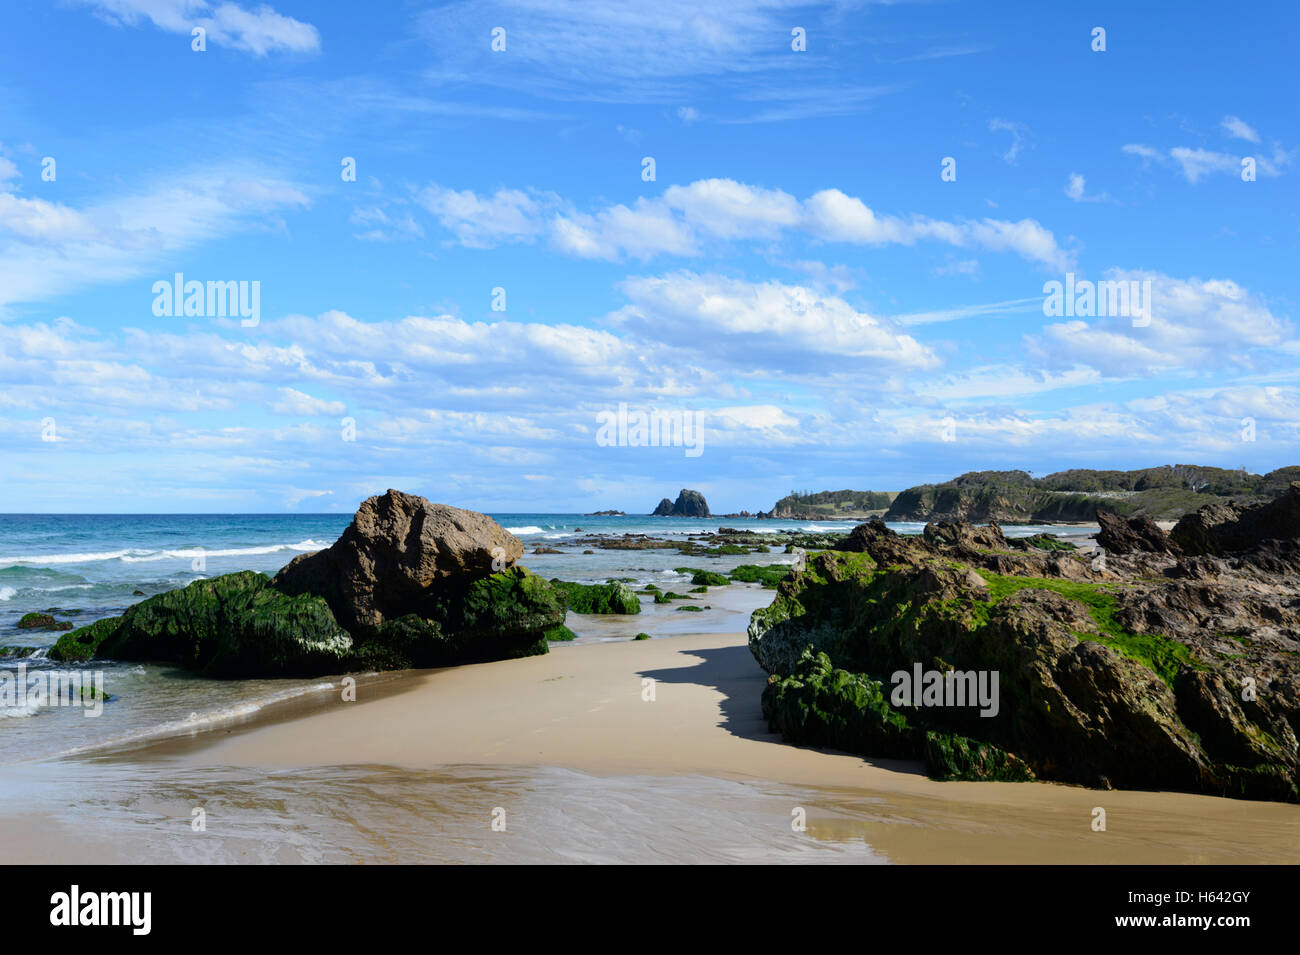 Surf Beach with Glasshouse Rocks in the distance, Narooma, South Coast, New South Wales, NSW, Australia Stock Photo